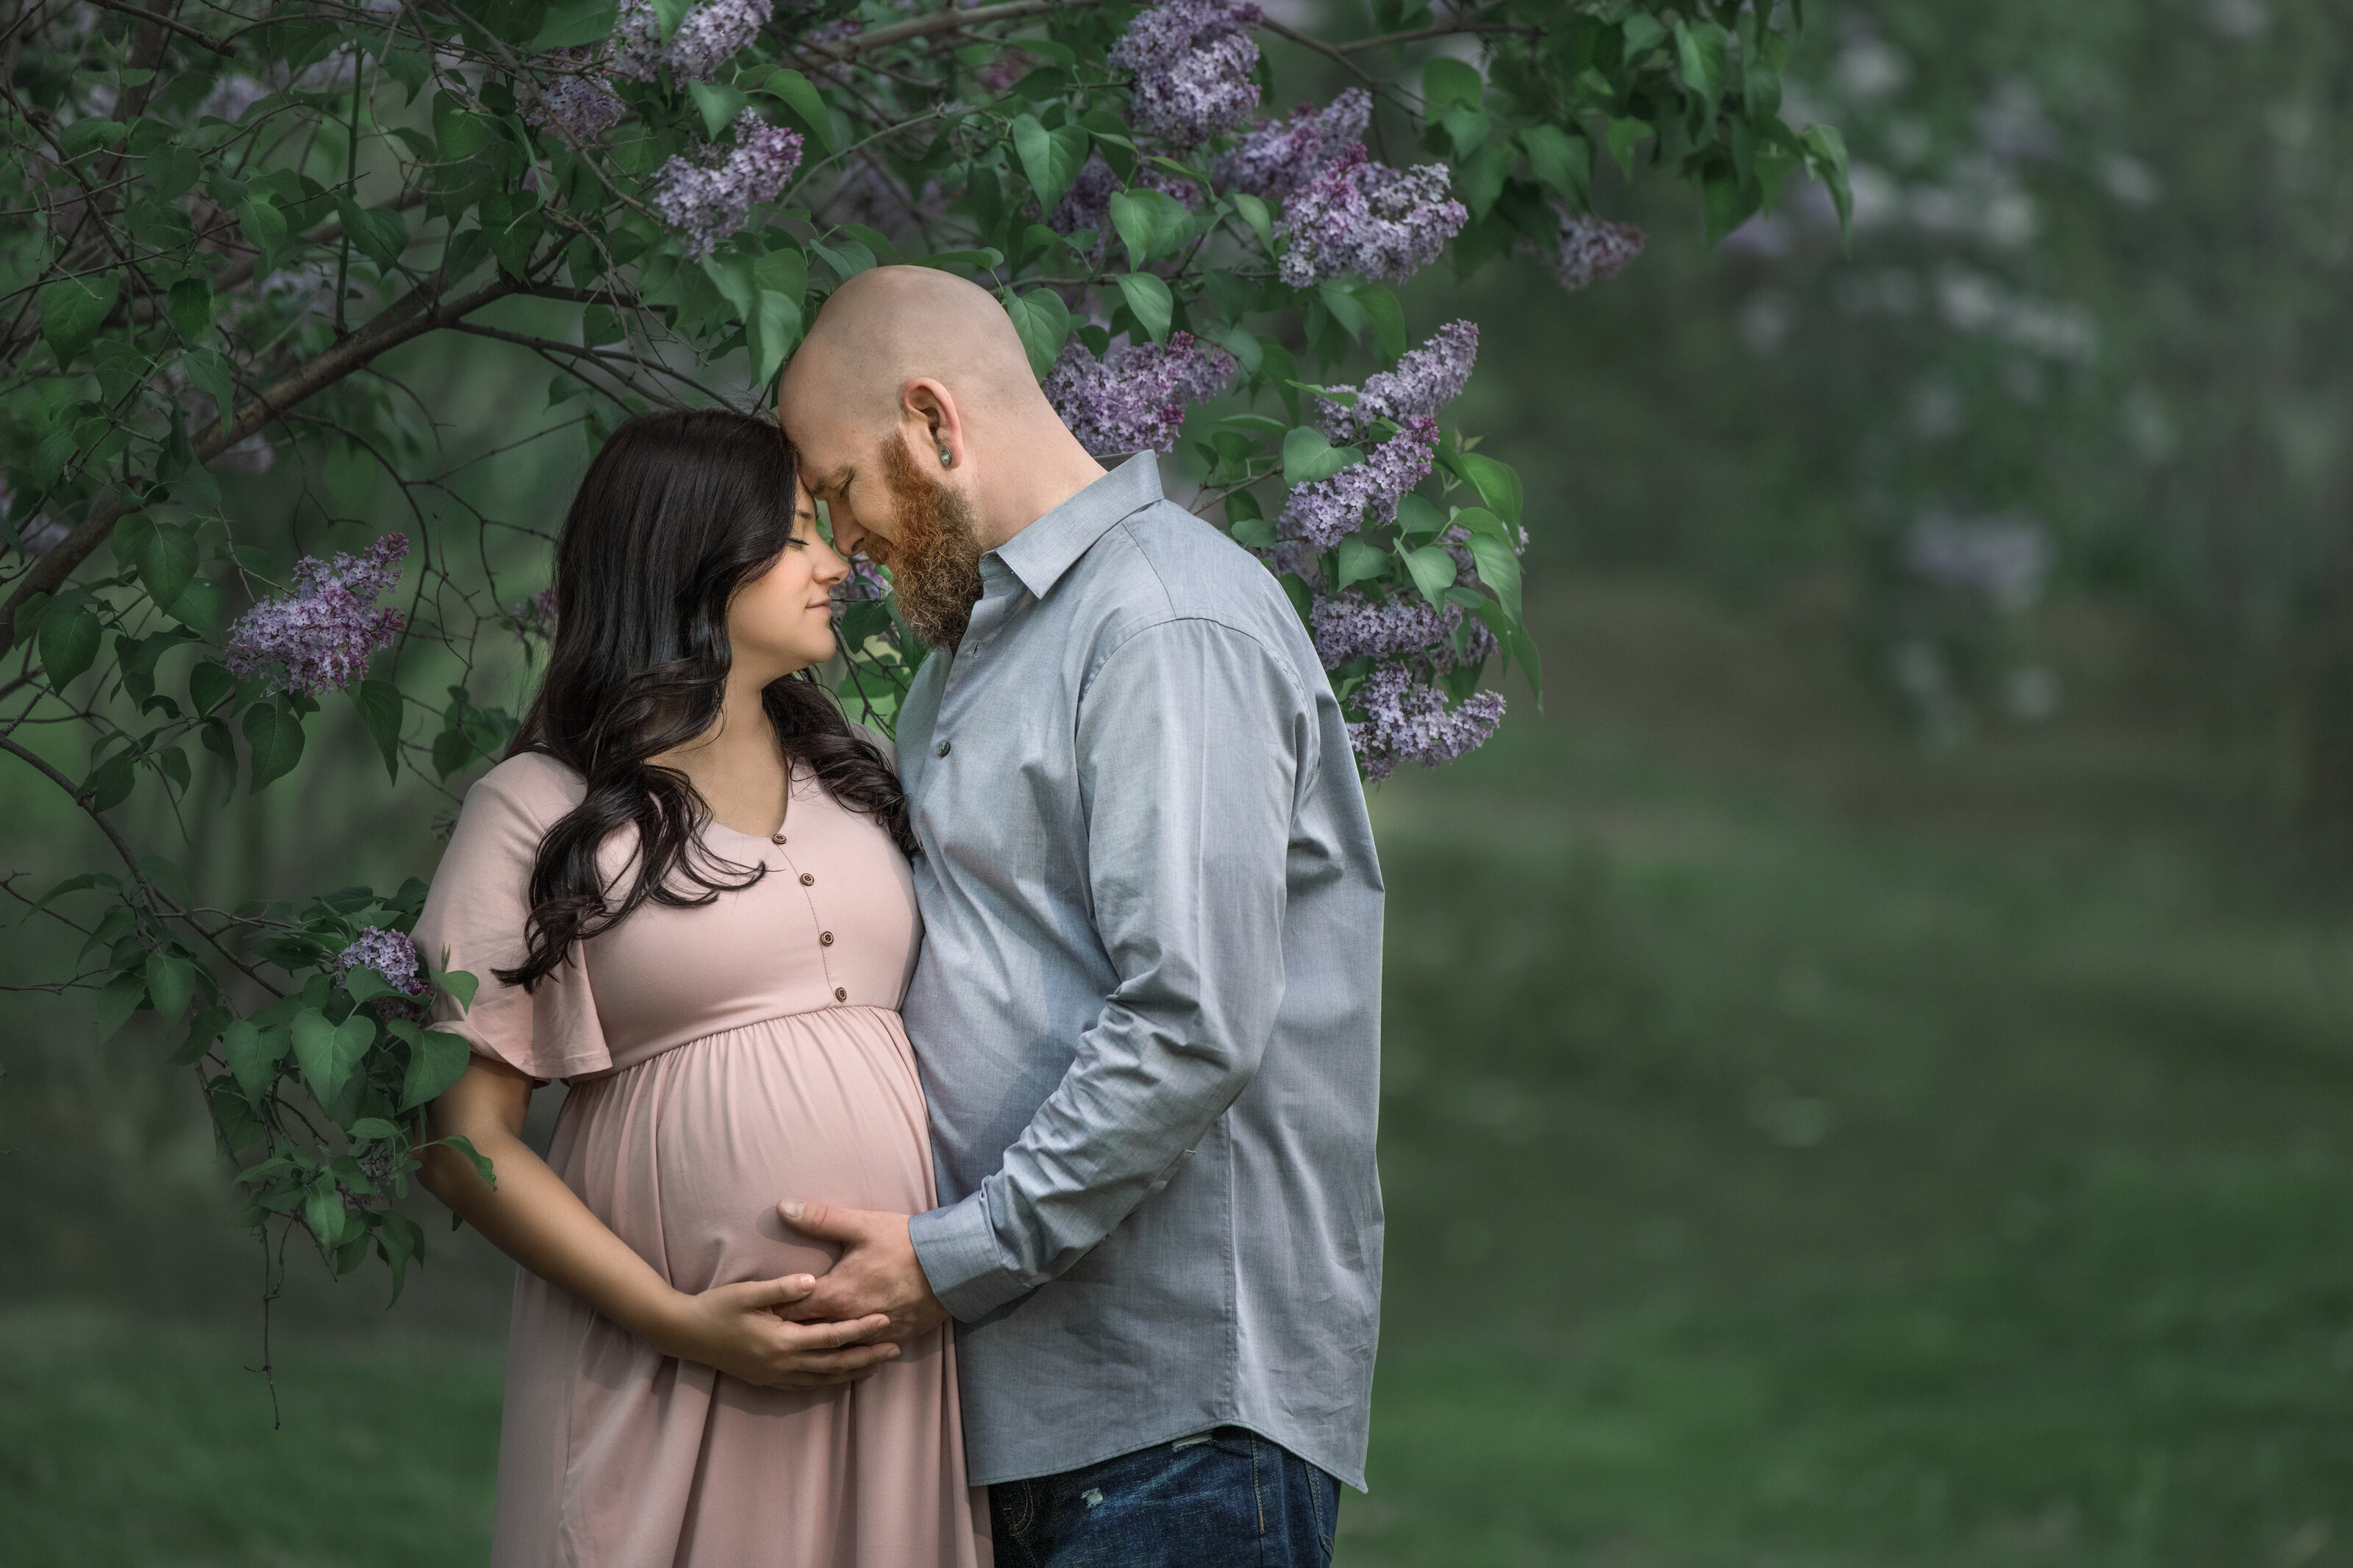 Expecting parents hold belly for photos during maternity photography shoot at Sayen Gardens in Hamilton, New Jersey